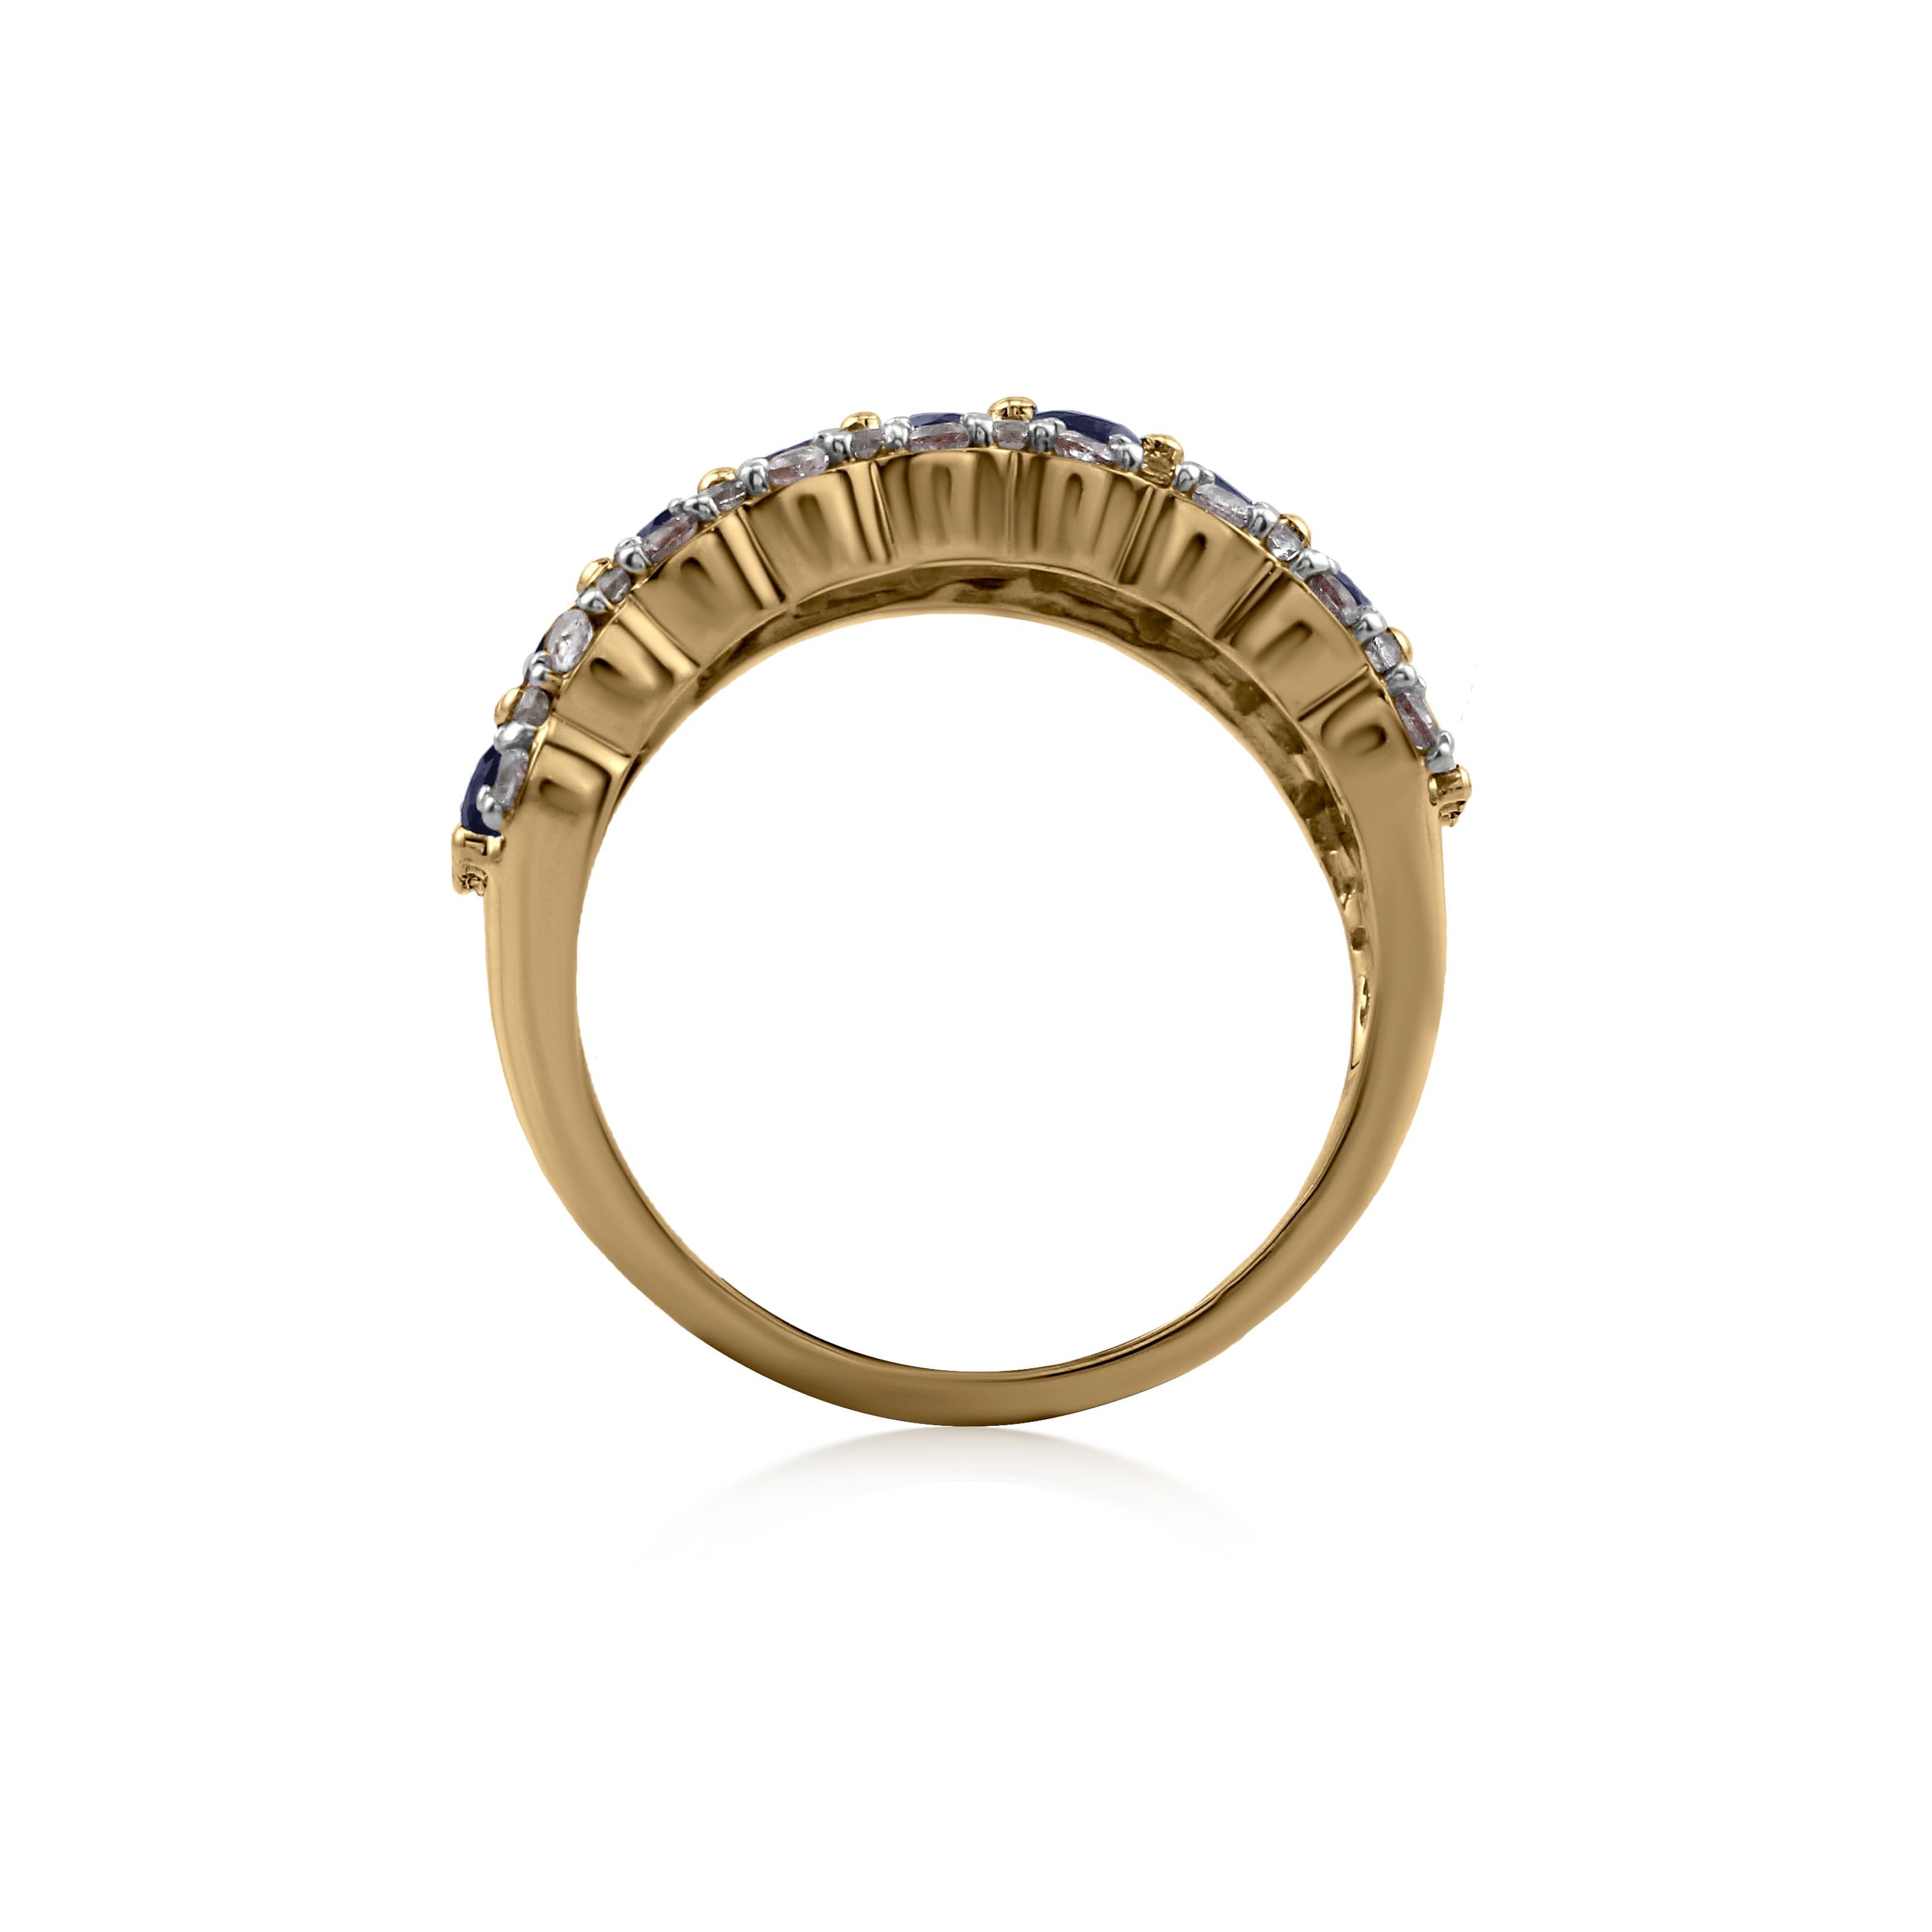 Contemporary Gemistry 4.15 Ct. T.W Double-Row Blue Sapphire Eternity Band Ring in 14K Gold